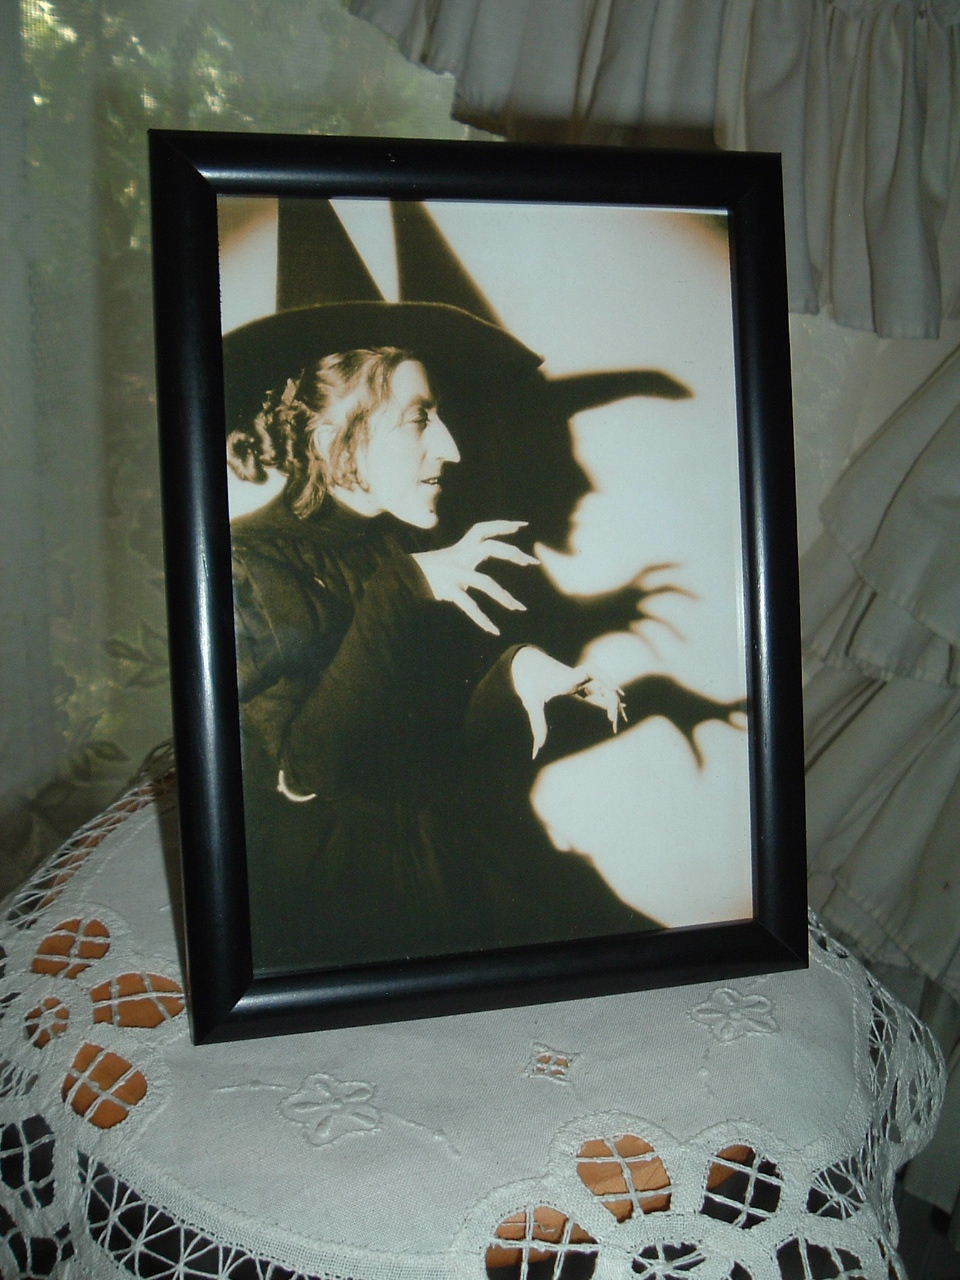 WICKED WITCH OF THE WEST 5X7 FRAMED PICTURE HALLOWEEN SHELF SITTER GATHERING